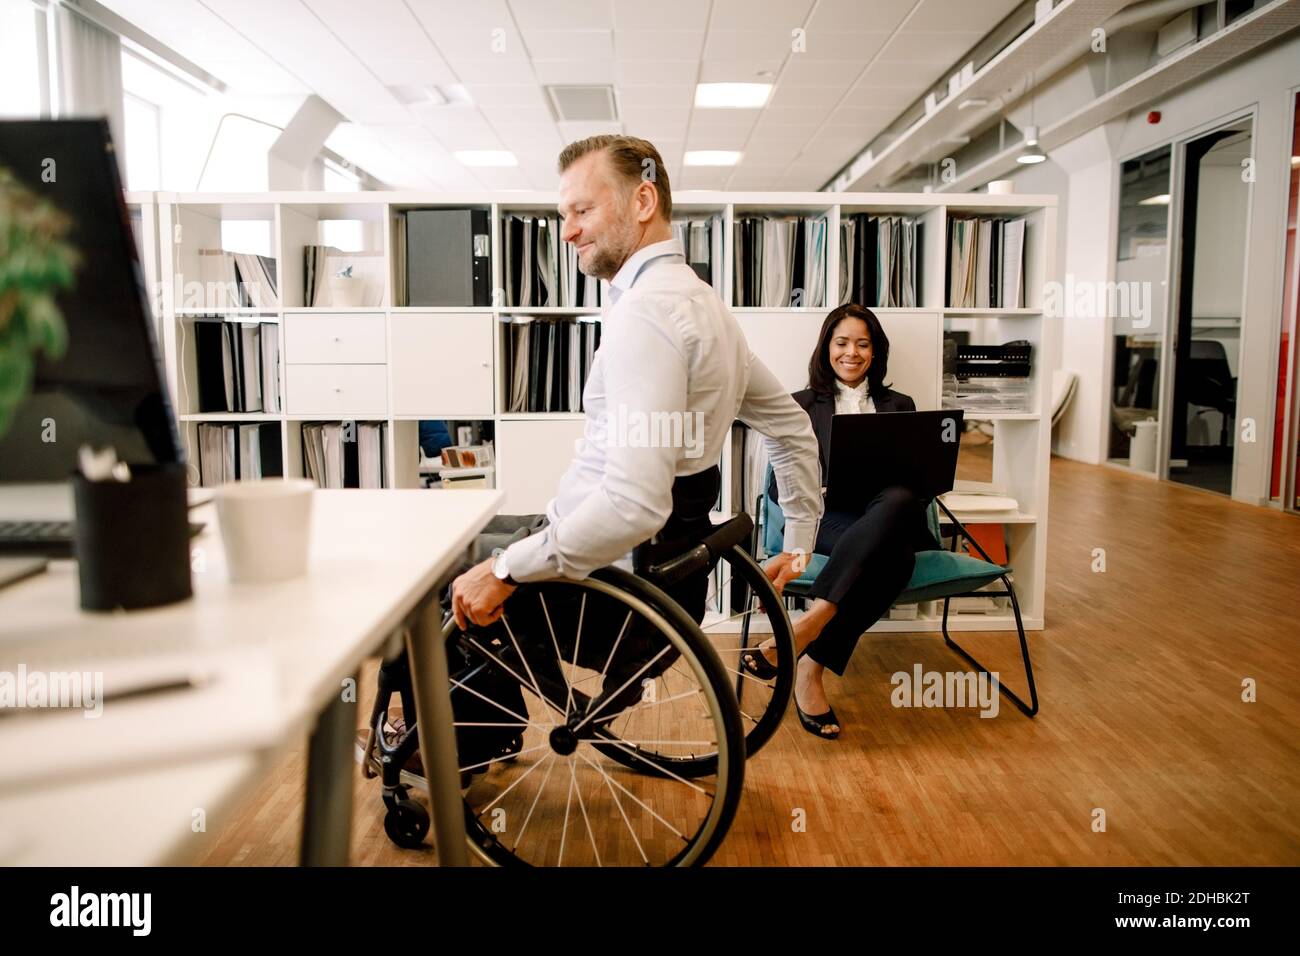 Disabled male professional sitting on wheelchair while smiling businesswoman using laptop at work place Stock Photo